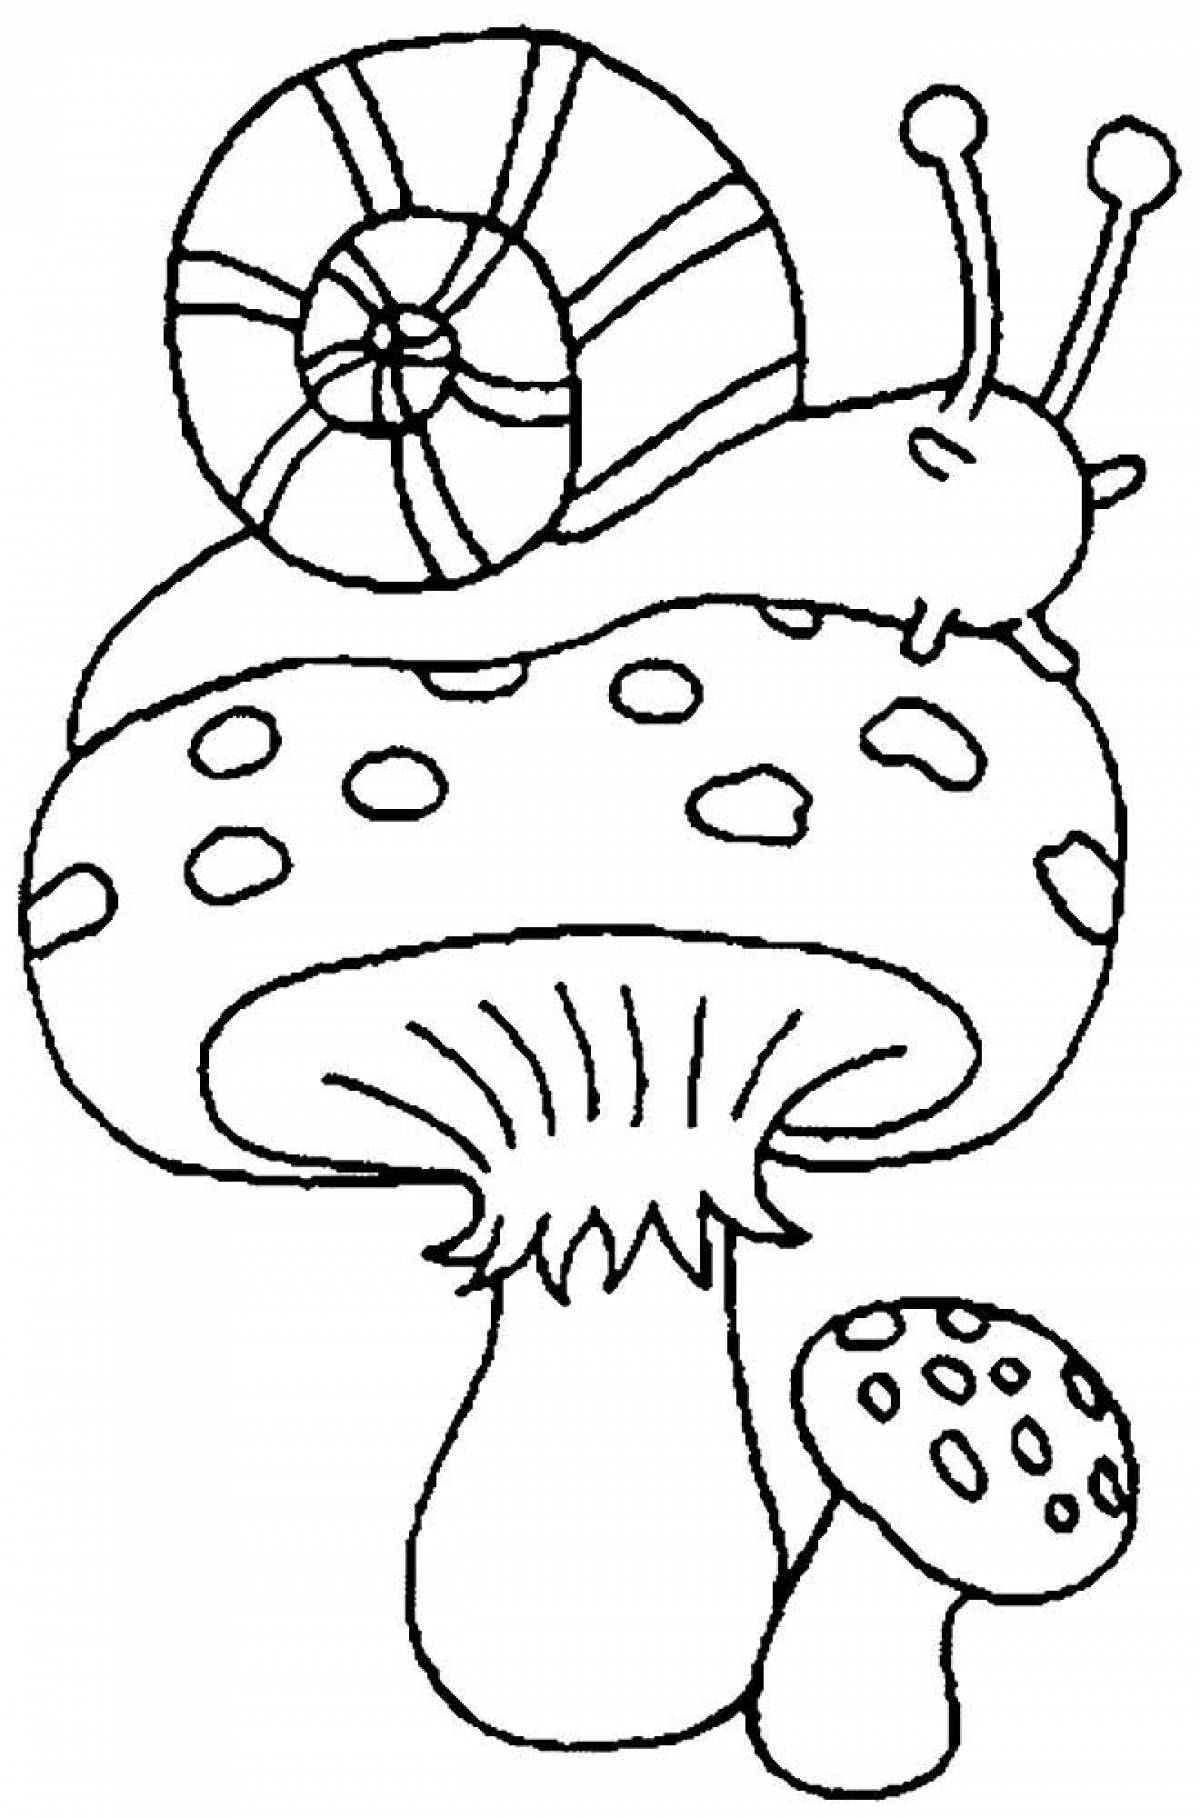 Fly agaric and snail